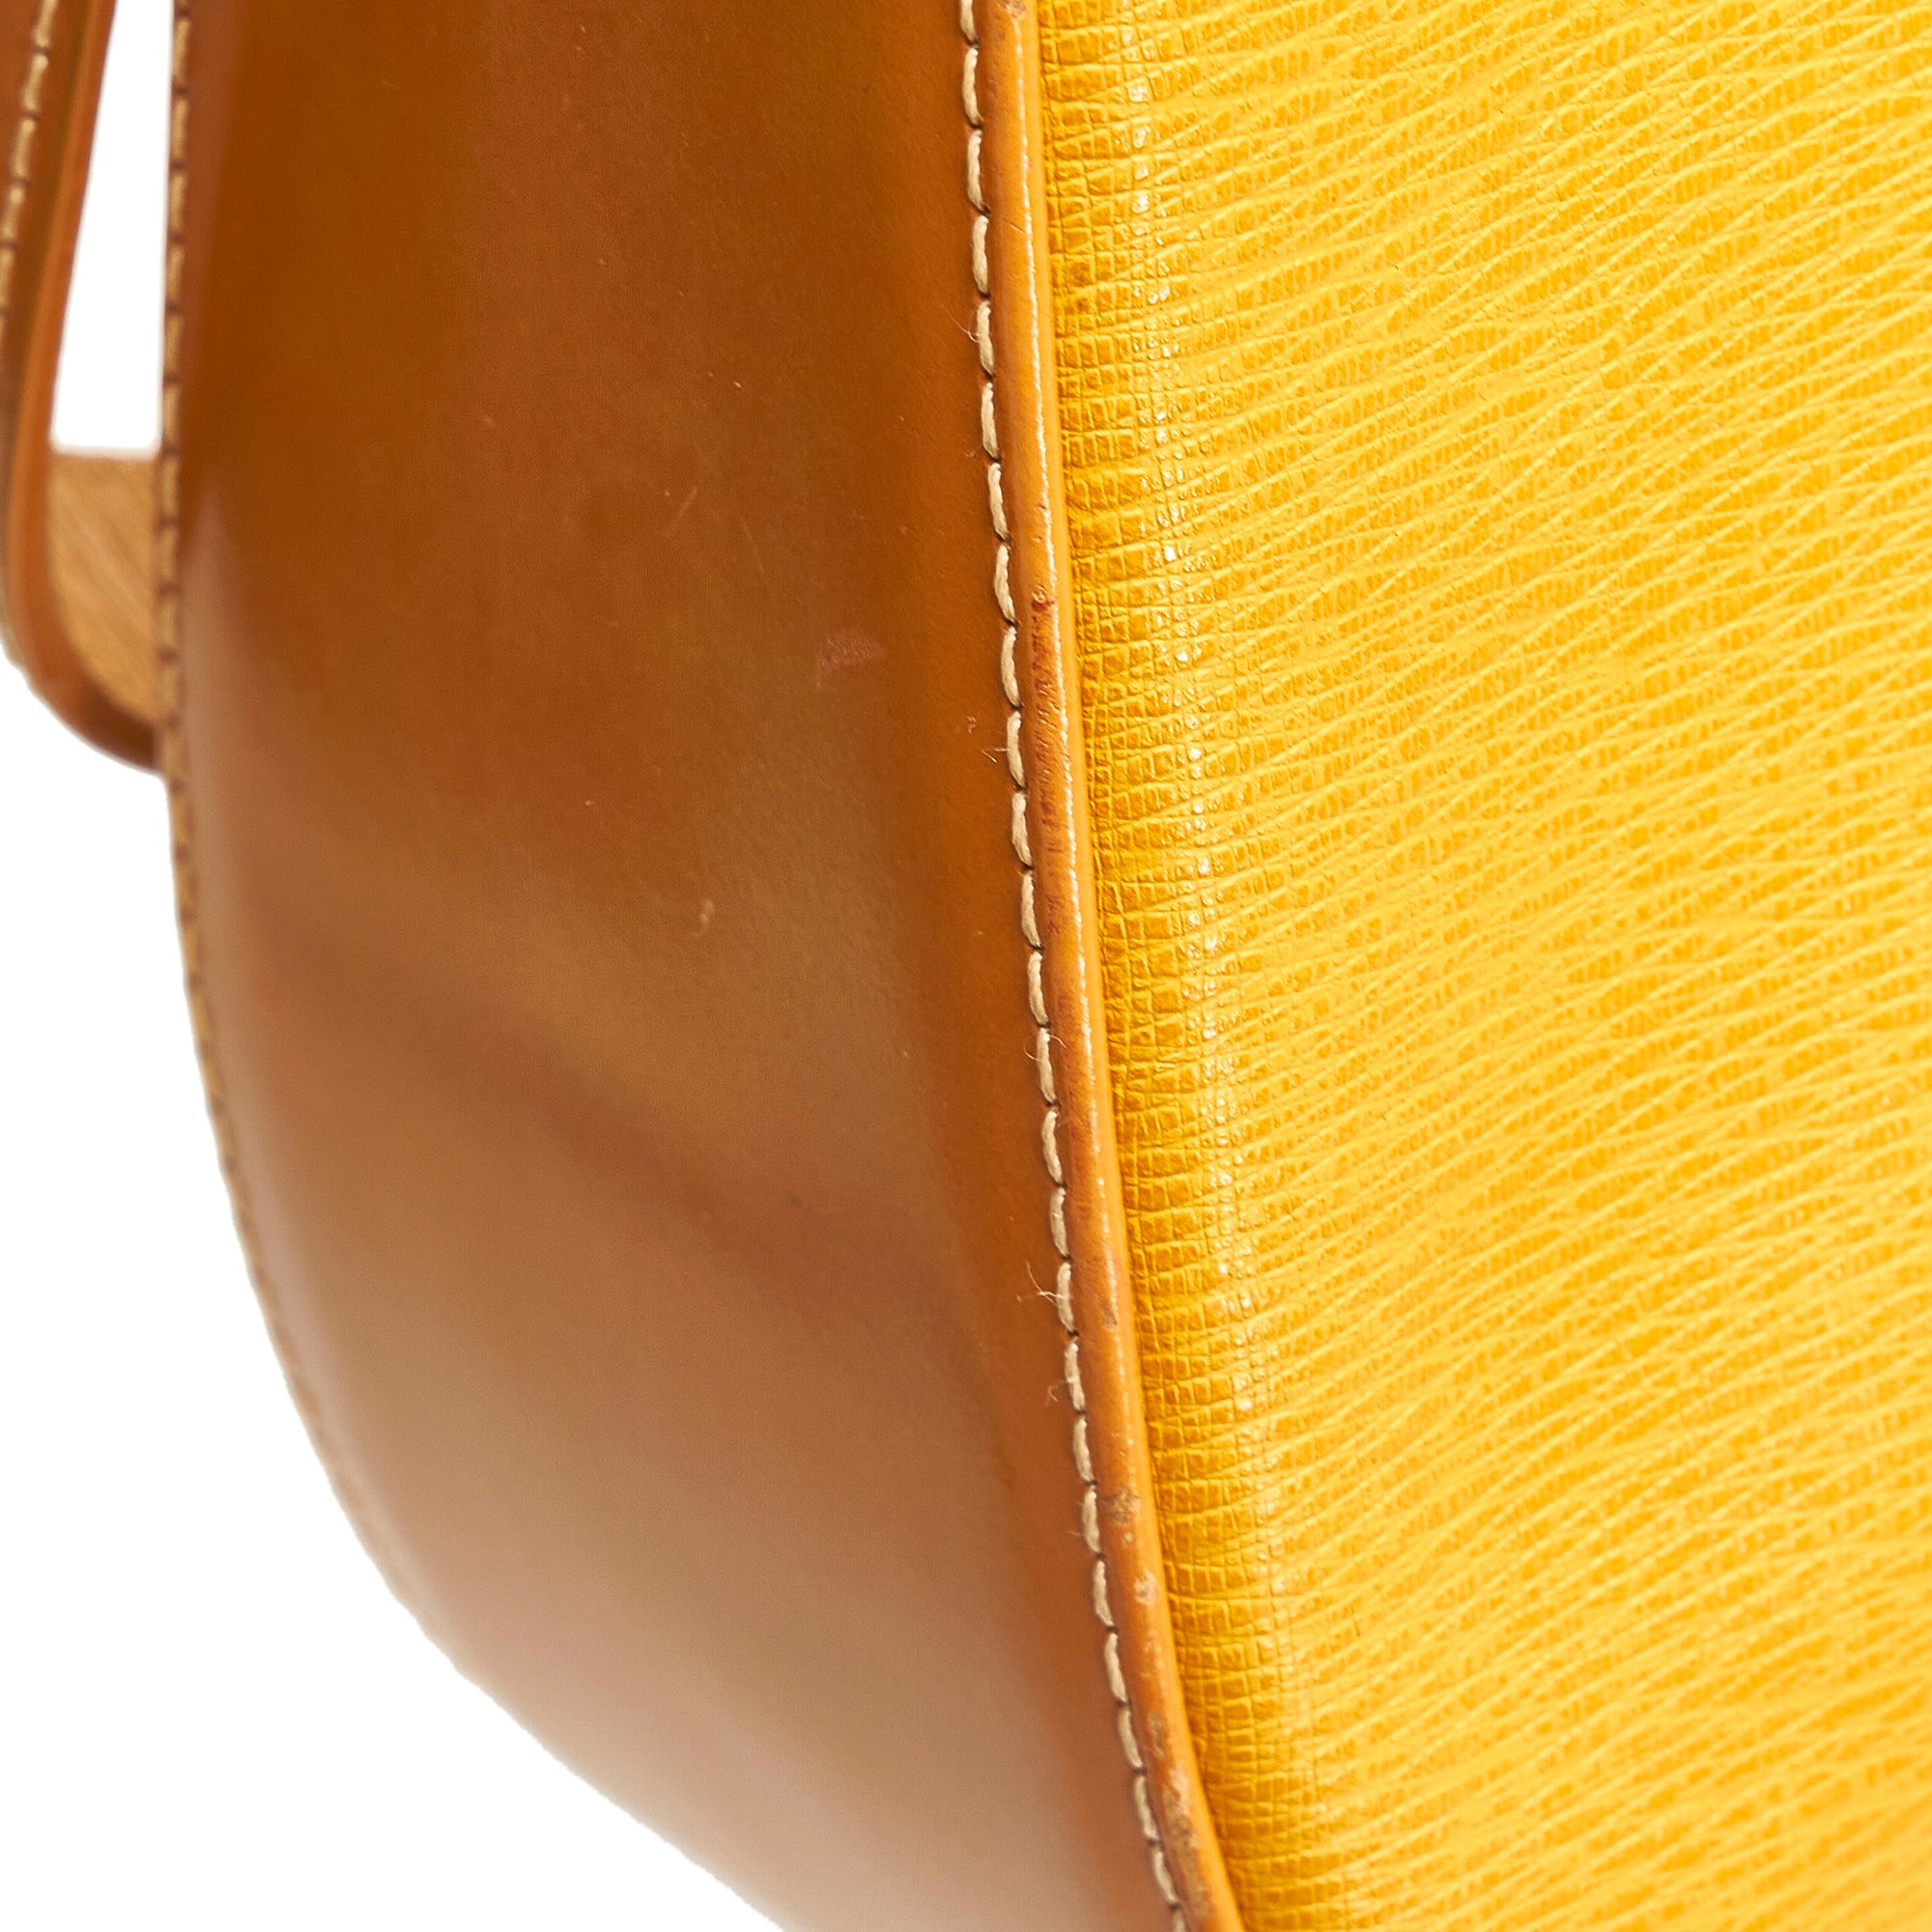 Burberry Mustard Patent Leather Top Zip Tote Burberry